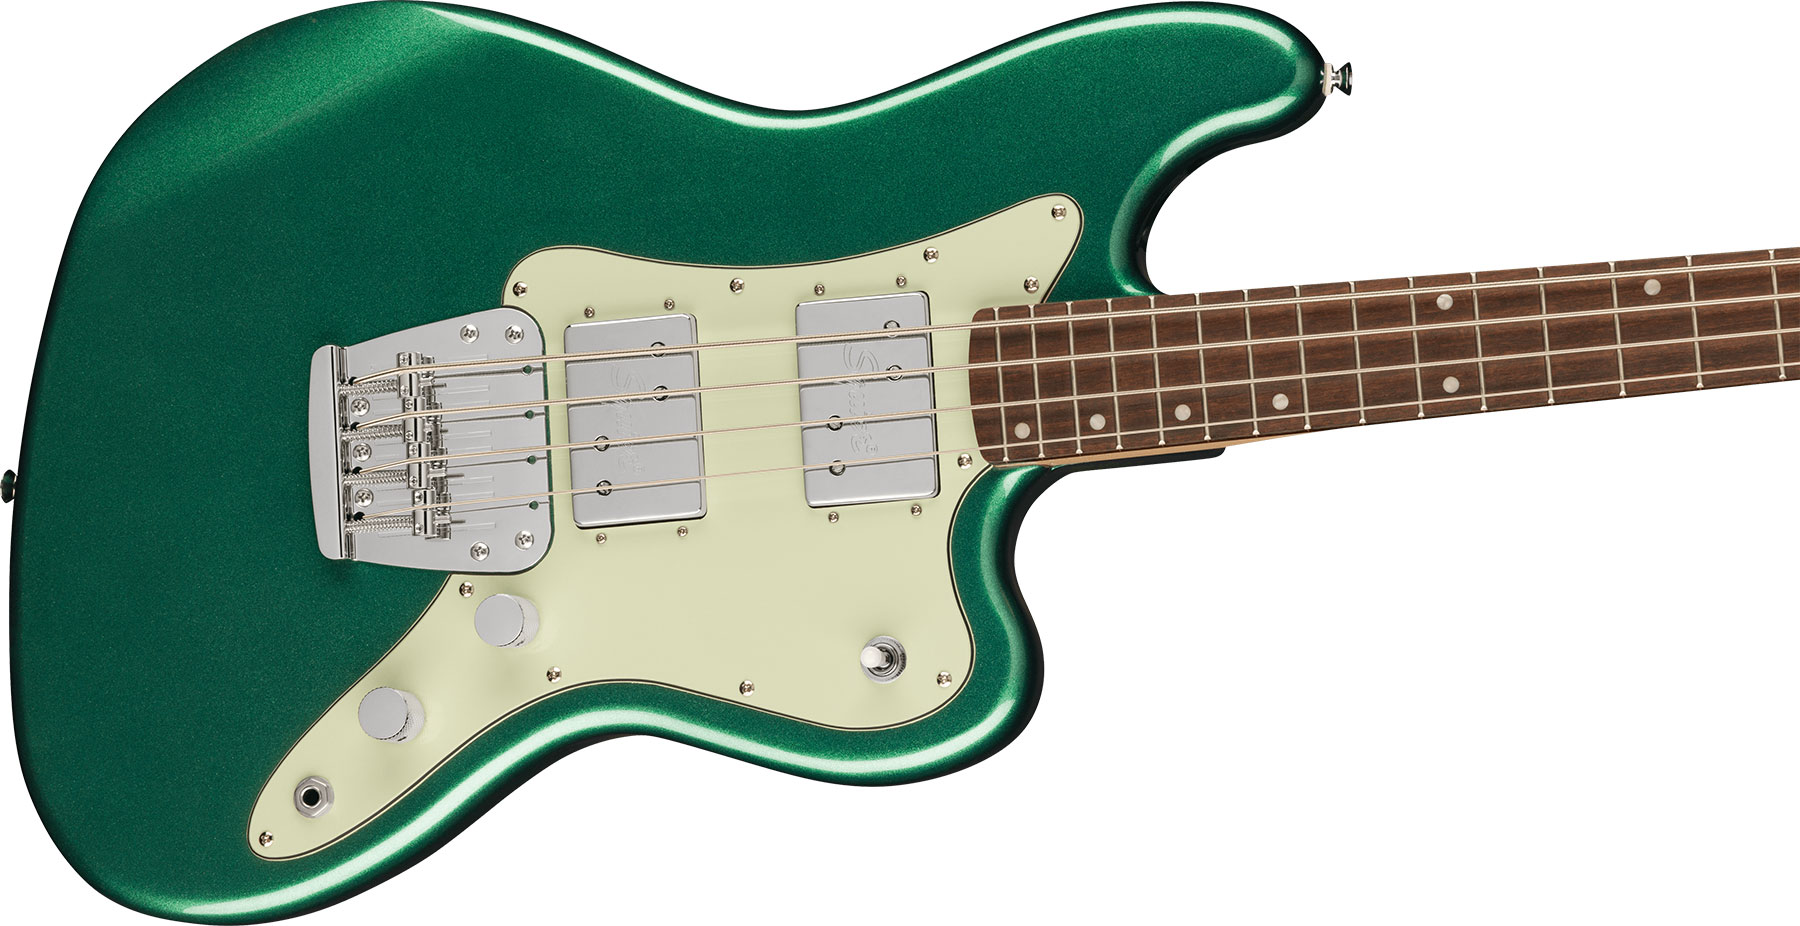 Squier Rascal Bass Hh Paranormal 2h Lau - Sherwood Green - Basse Électrique Solid Body - Variation 2